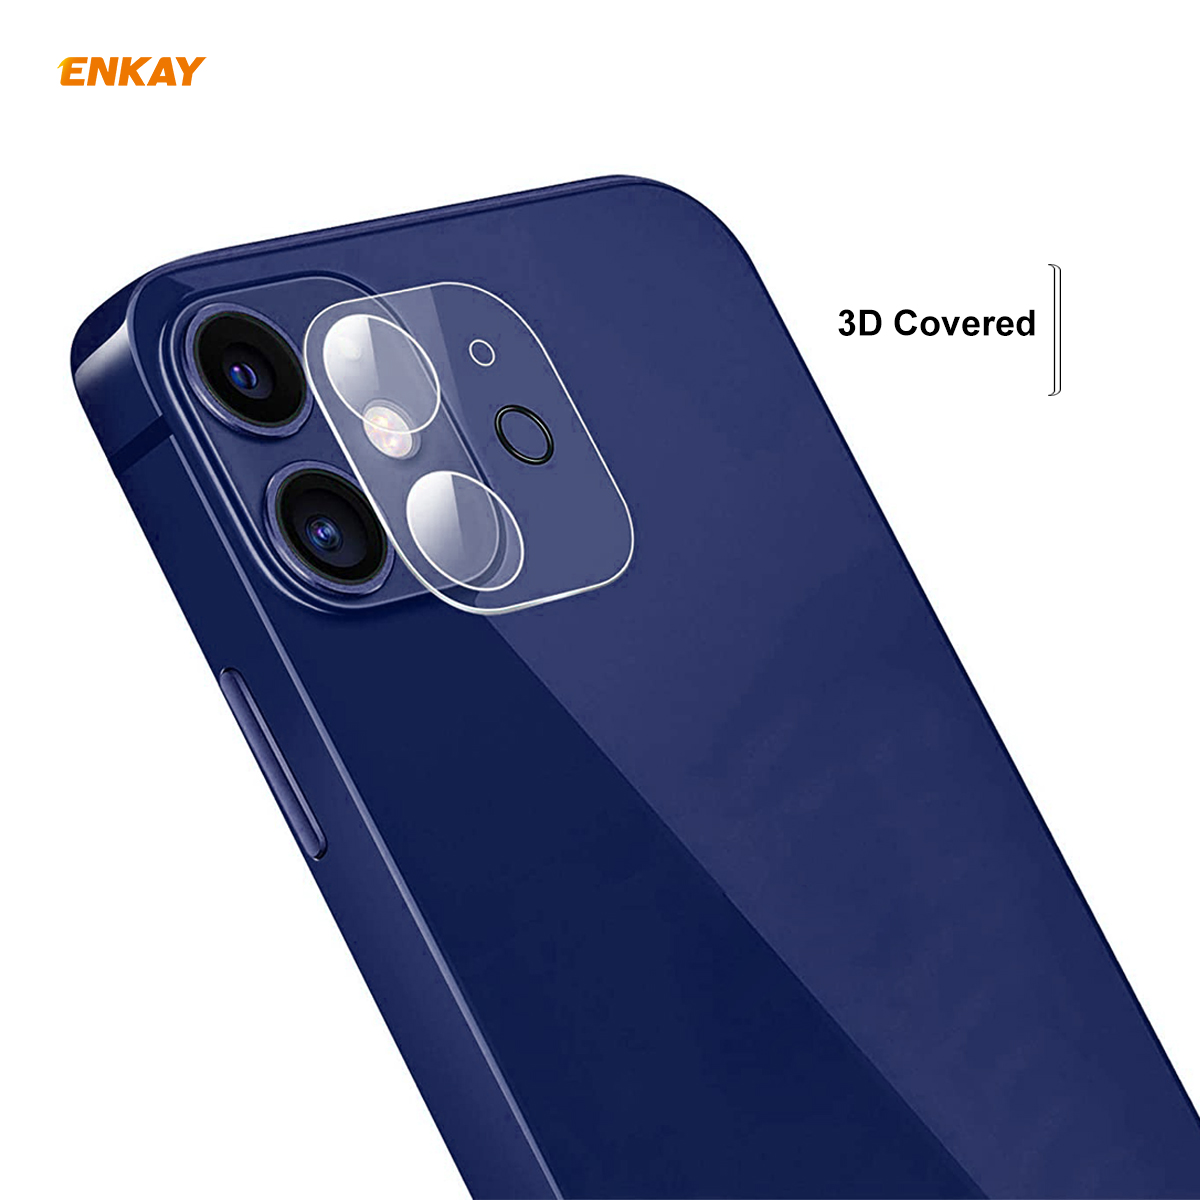 ENKAY-for-iPhone-12-3D-Anti-Scratch-Ultra-Thin-HD-Clear-Soft-Tempered-Glass-Phone-Camera-Lens-Protec-1784342-3